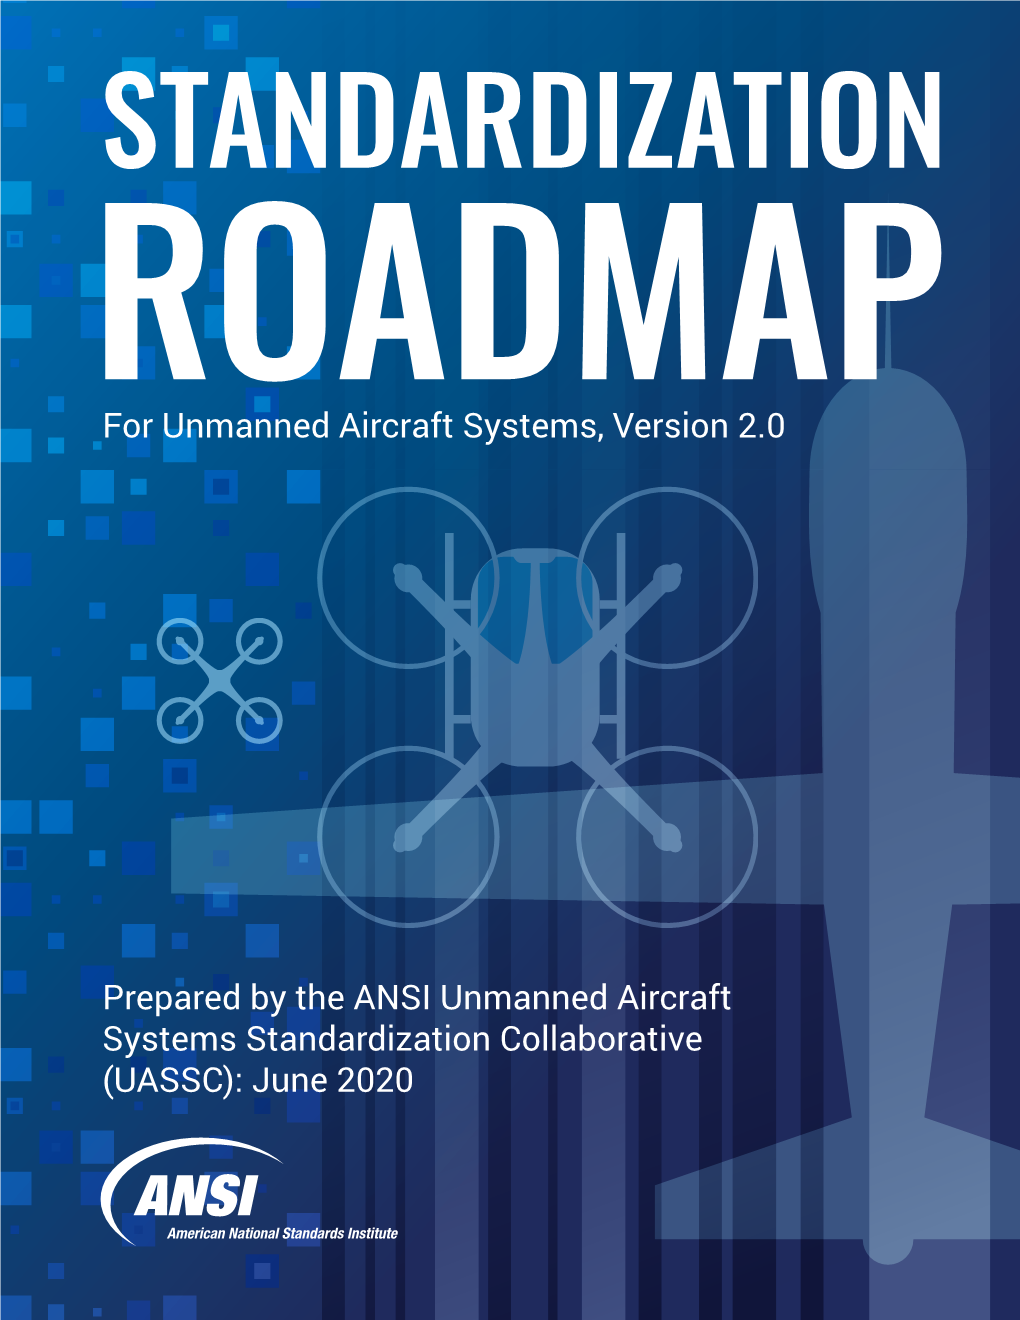 ANSI UASSC Standardization Roadmap for Unmanned Aircraft Systems – V2 Page 3 of 410